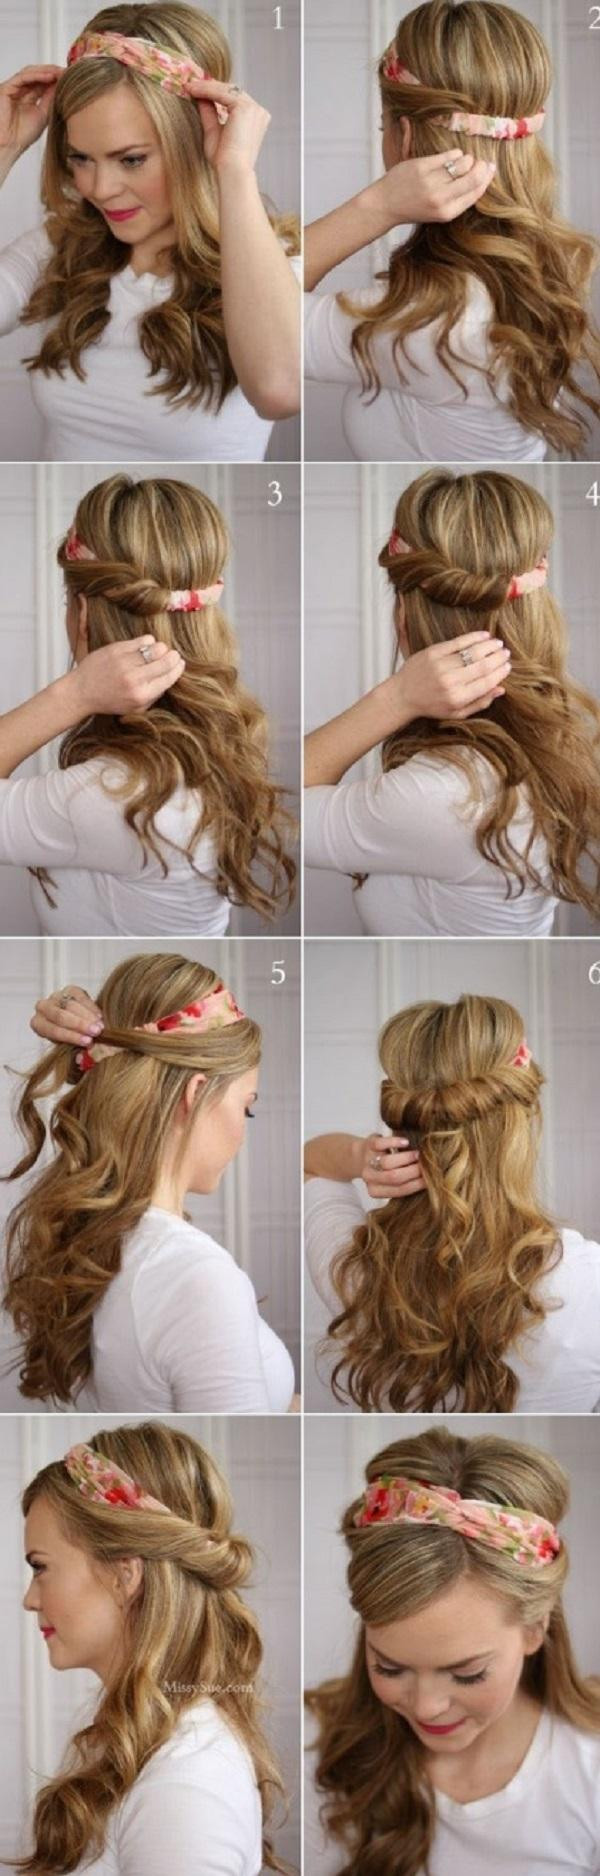 Hairstyles For Long Hair Videos
 25 Easy Hairstyles for long hair